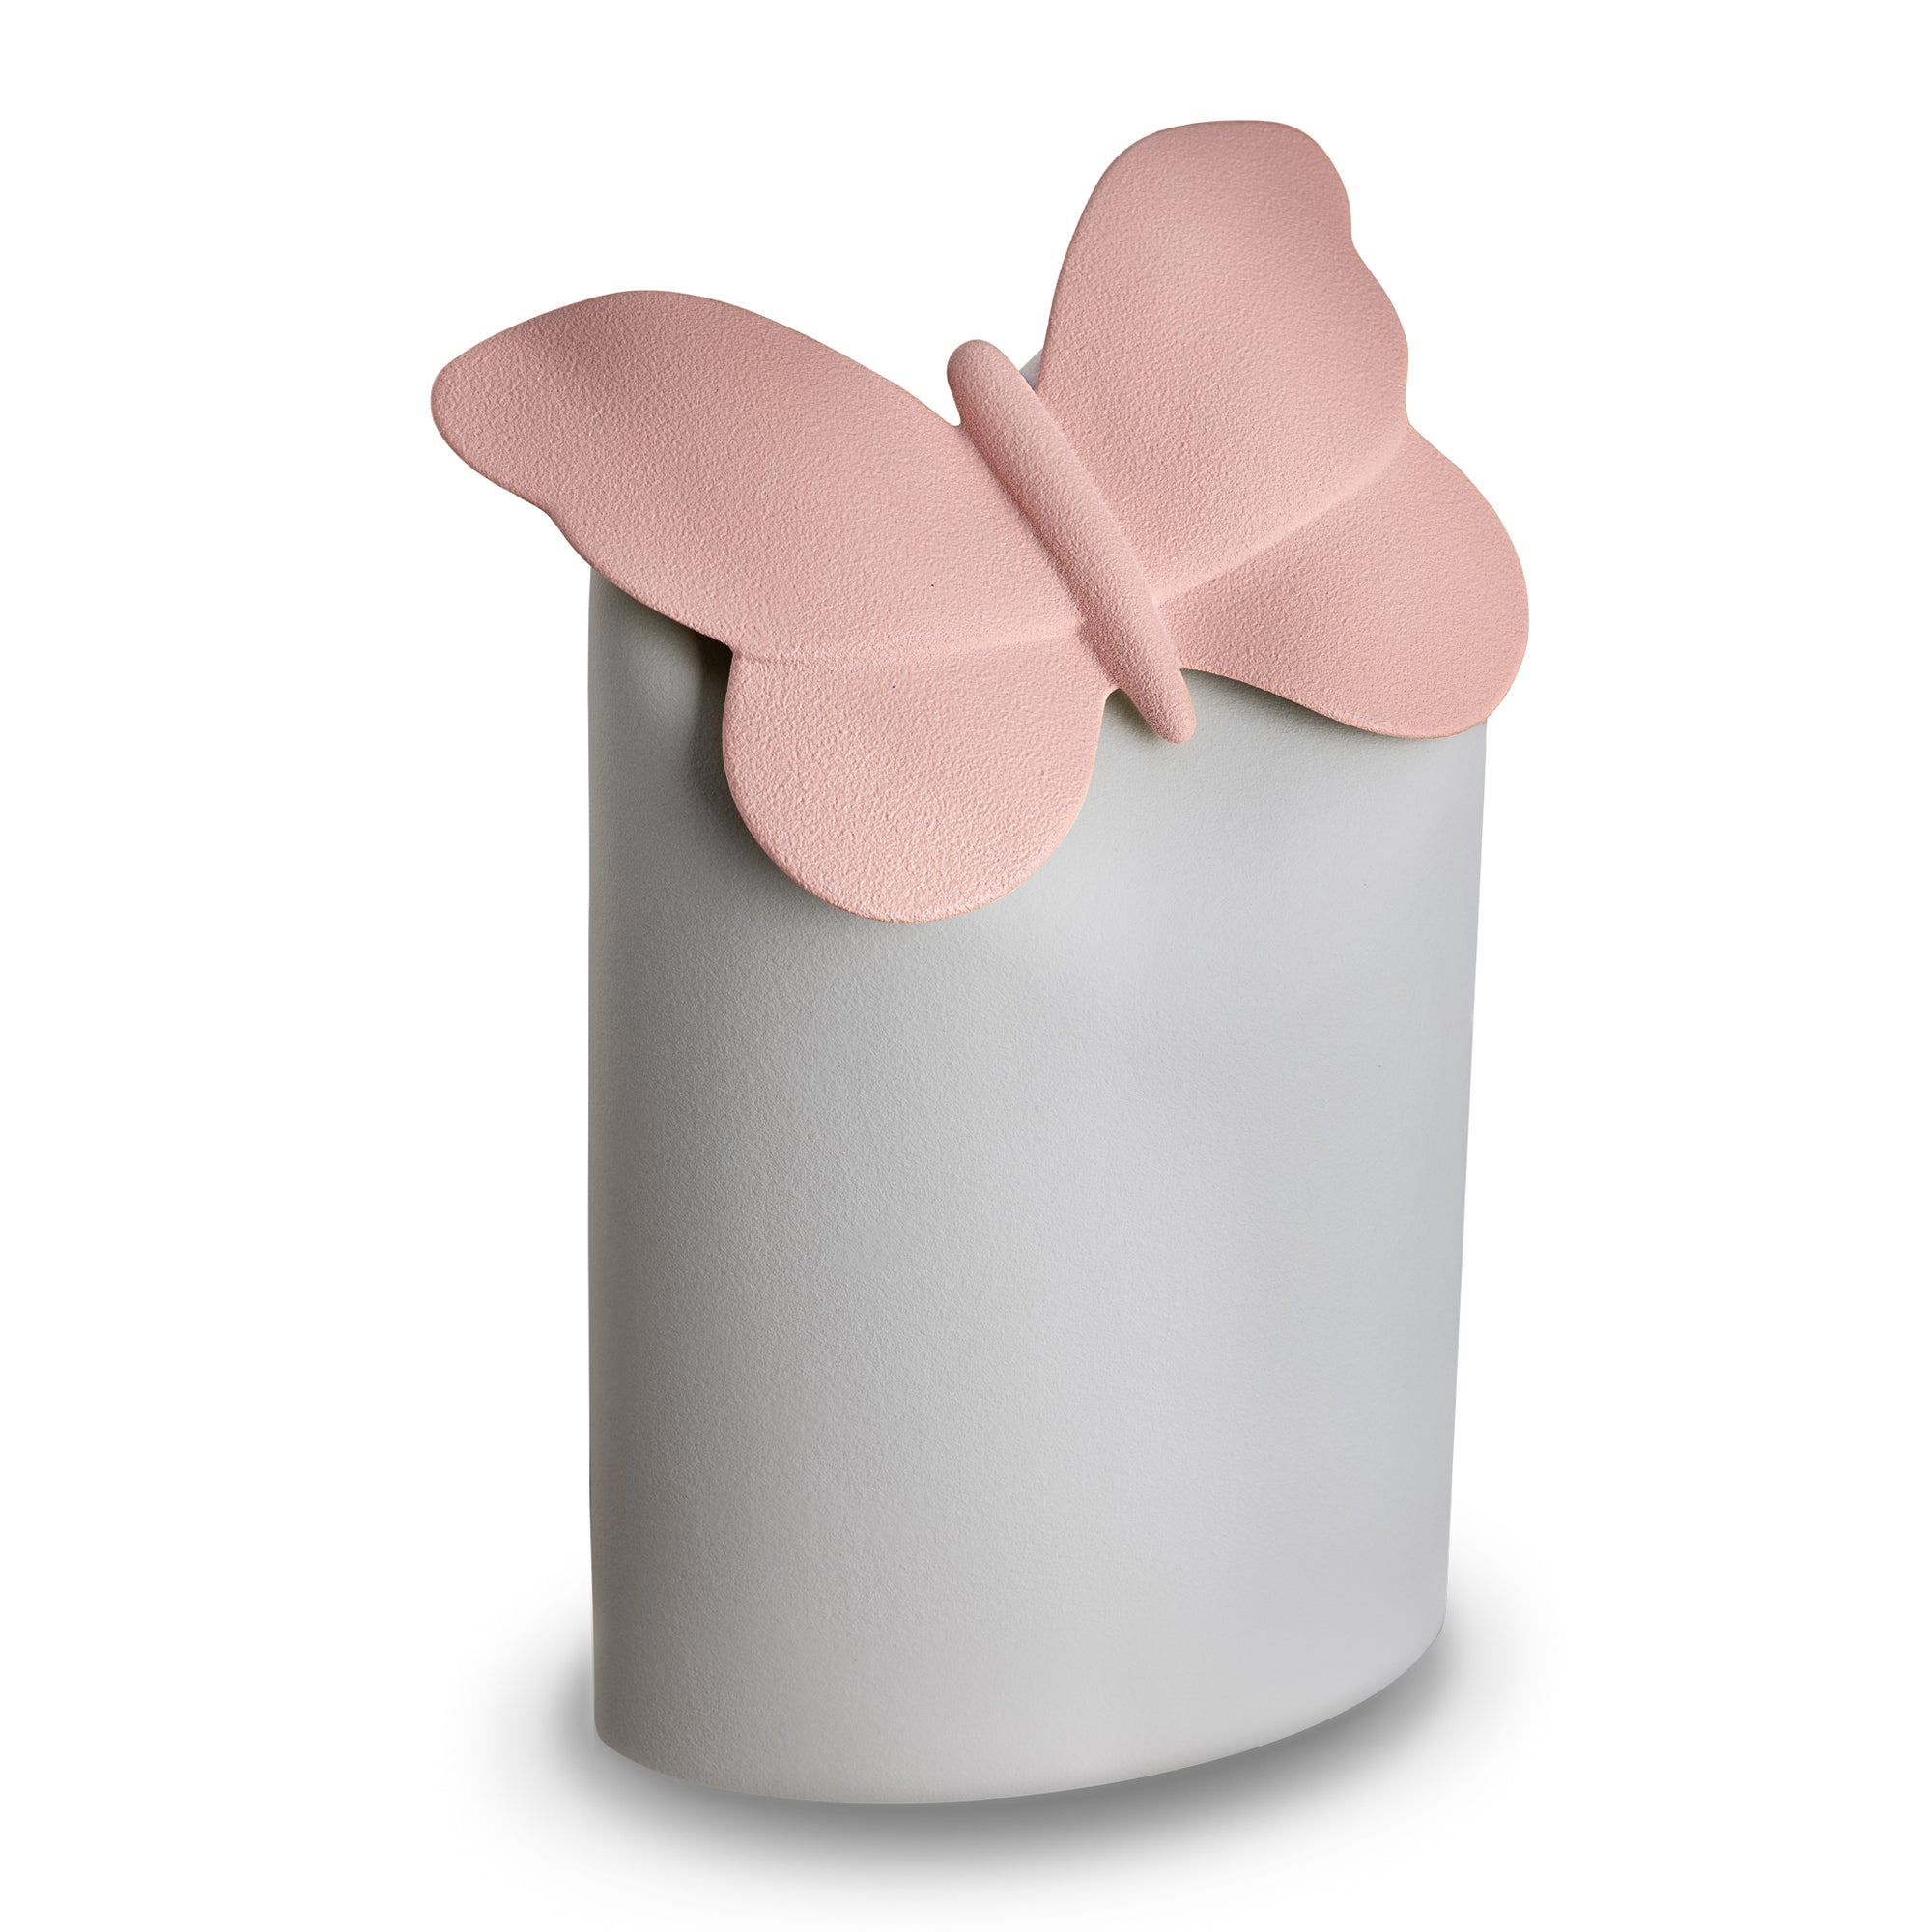 CA150   Paradise Butterfly Standard Adult Urn Silver Grey & Pink